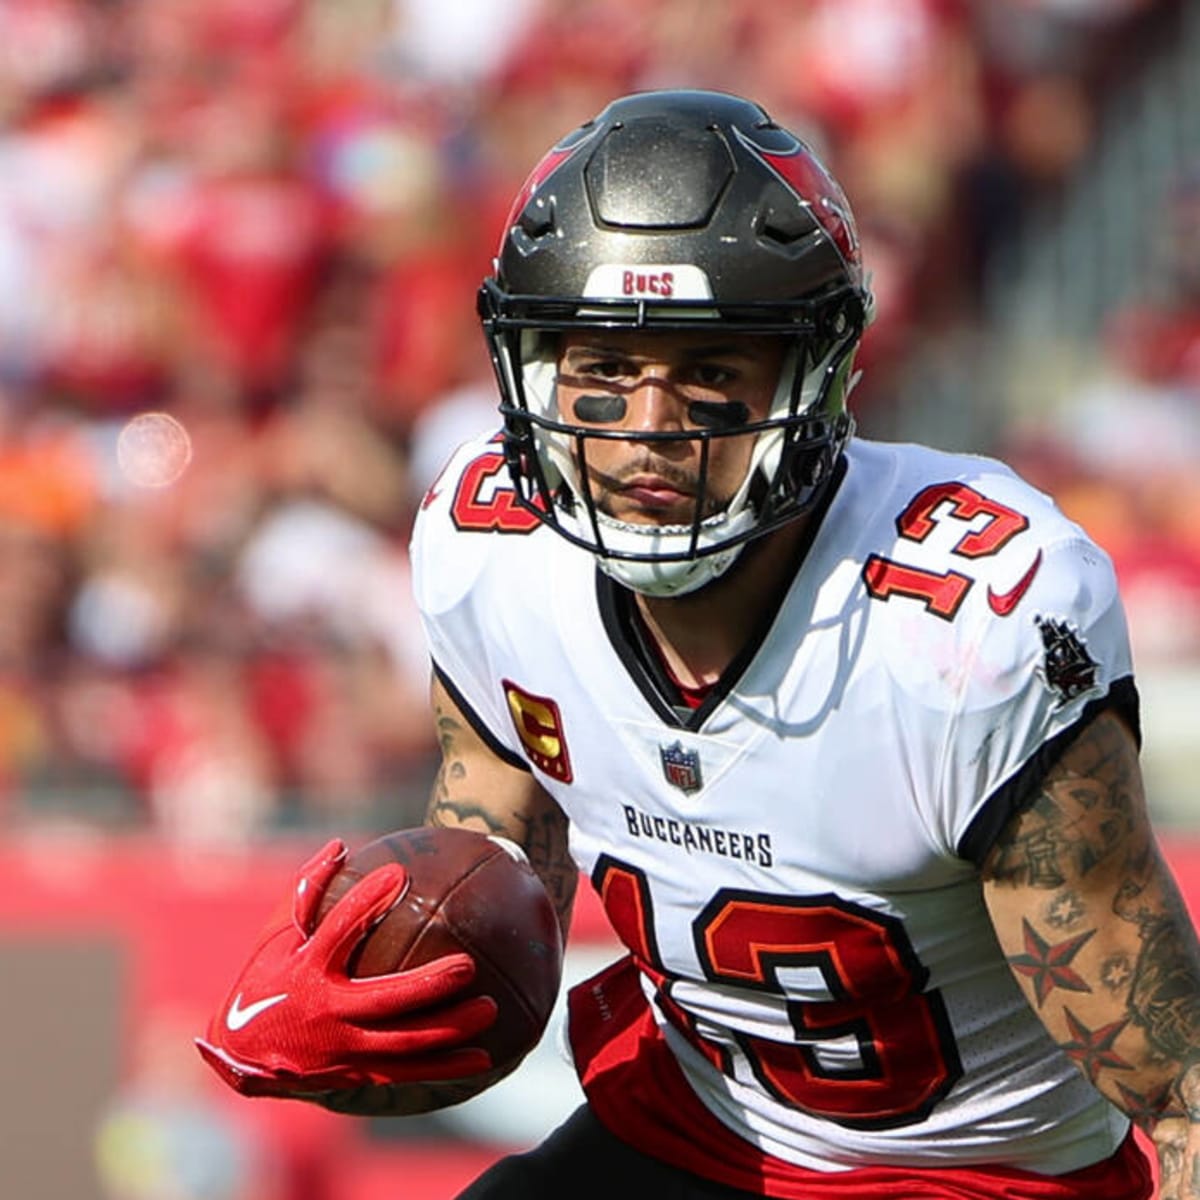 Mike Evans likely to leave Buccaneers after season